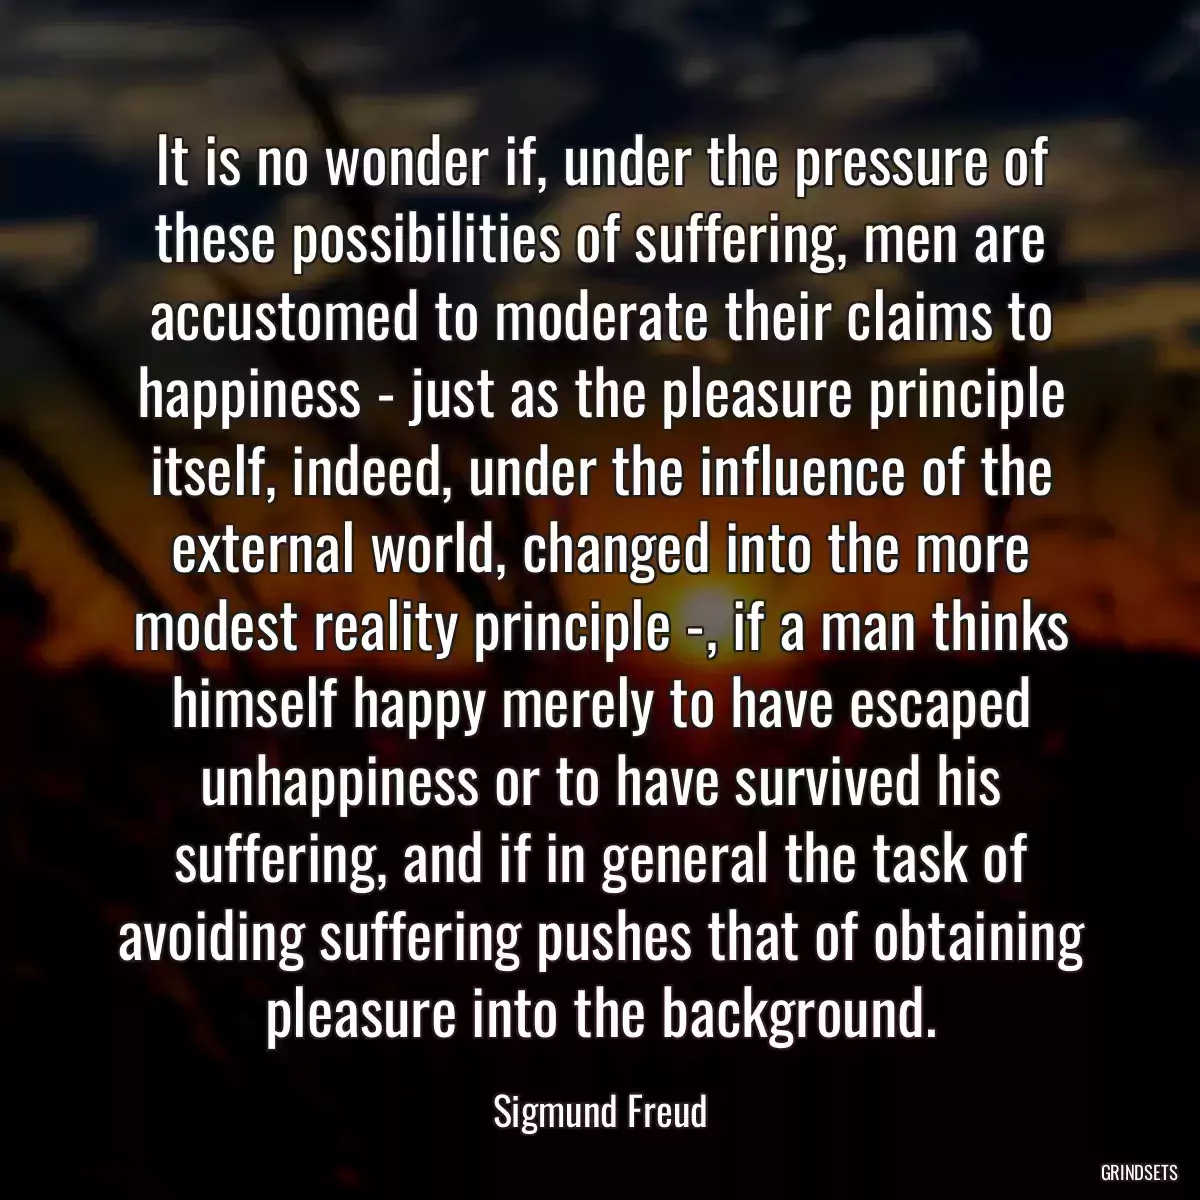 It is no wonder if, under the pressure of these possibilities of suffering, men are accustomed to moderate their claims to happiness - just as the pleasure principle itself, indeed, under the influence of the external world, changed into the more modest reality principle -, if a man thinks himself happy merely to have escaped unhappiness or to have survived his suffering, and if in general the task of avoiding suffering pushes that of obtaining pleasure into the background.